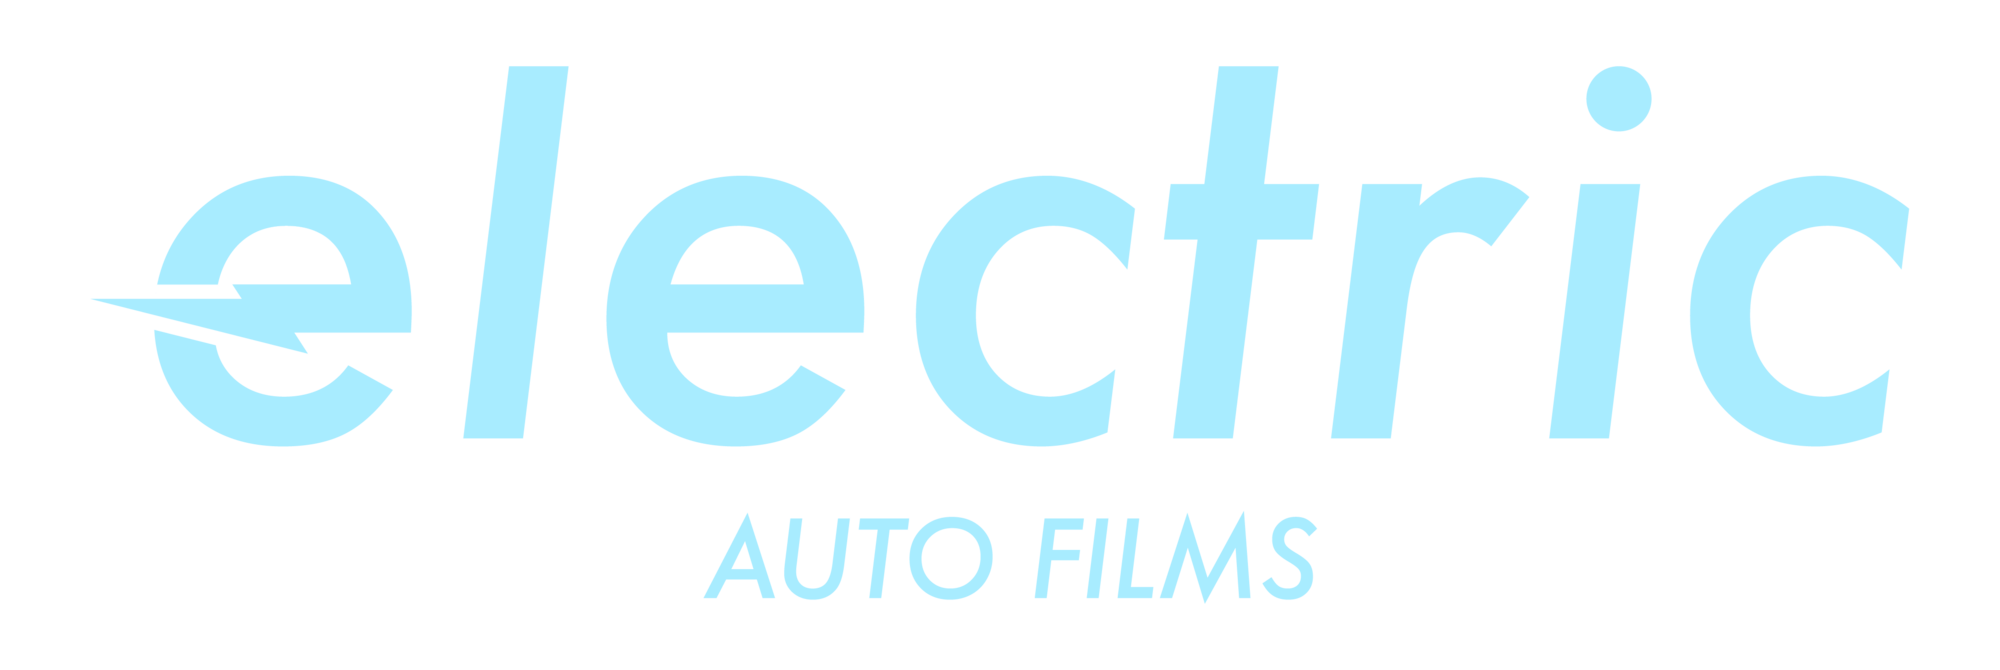 Electric Auto Films Logo (watermark)-01.png